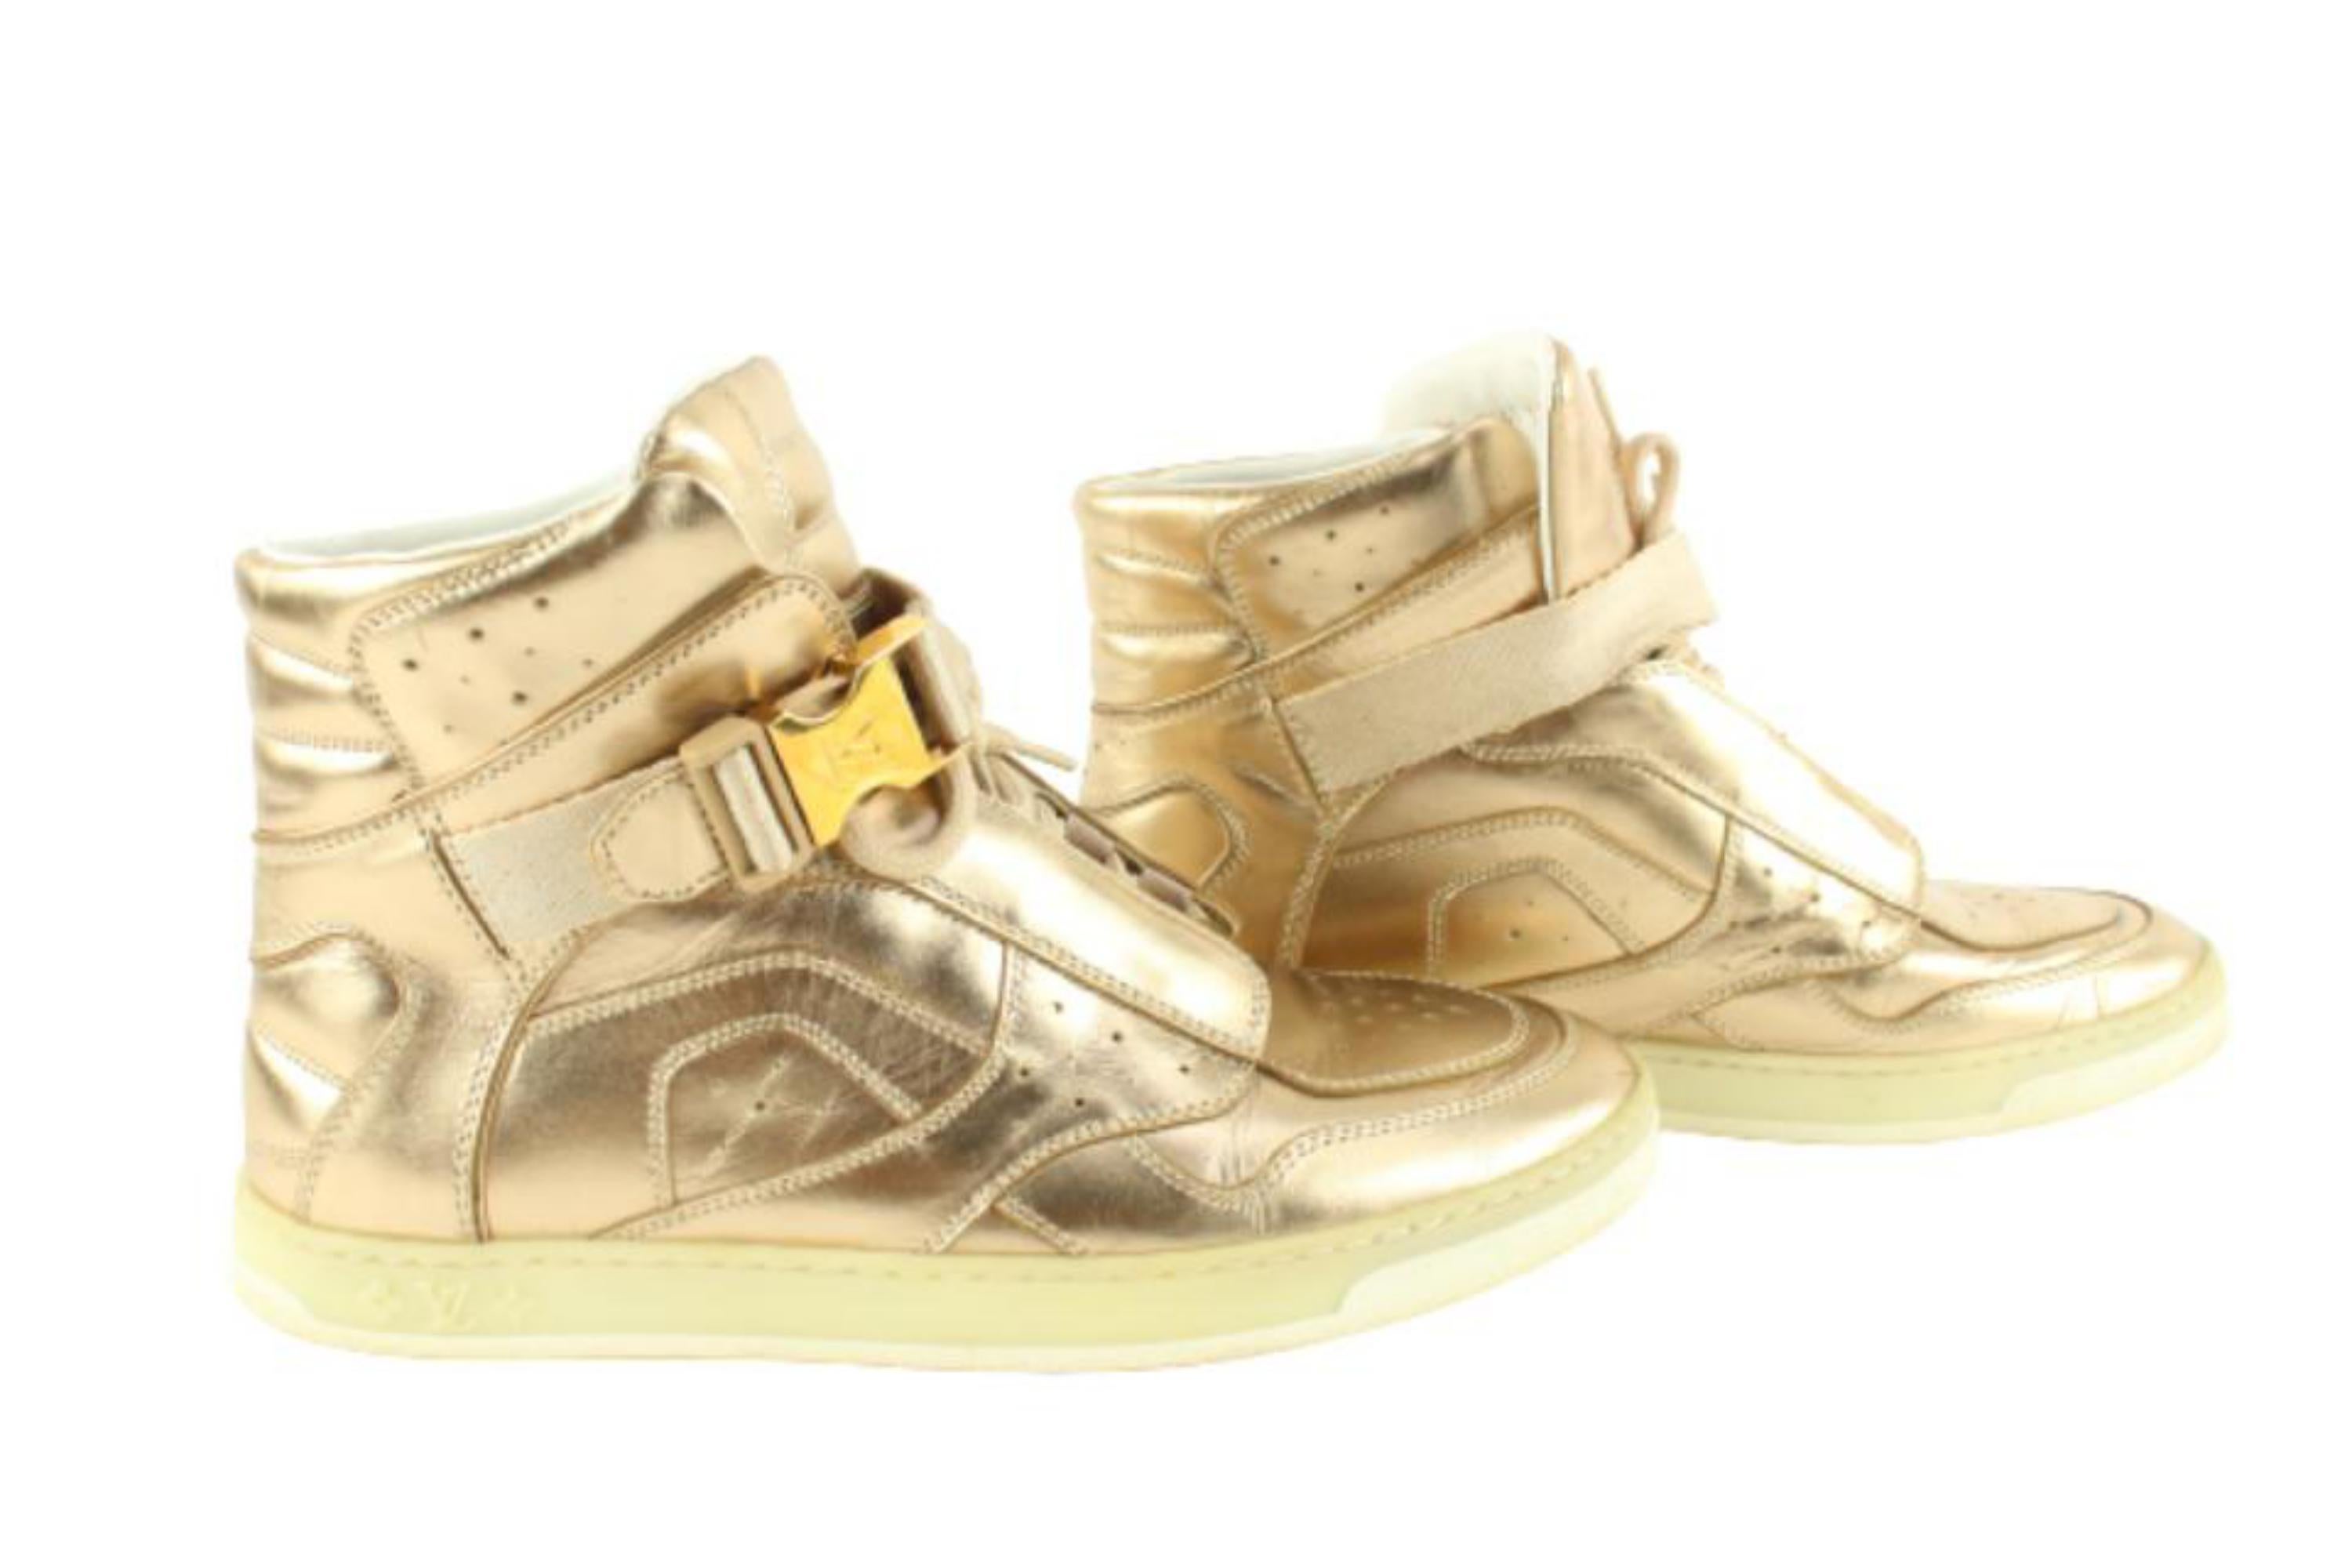 Louis Vuitton Size 36 Gold Metallic High Top Sneaker 1223lv15
Date Code/Serial Number: GO 0143
Made In: Italy
Measurements: Length:  10